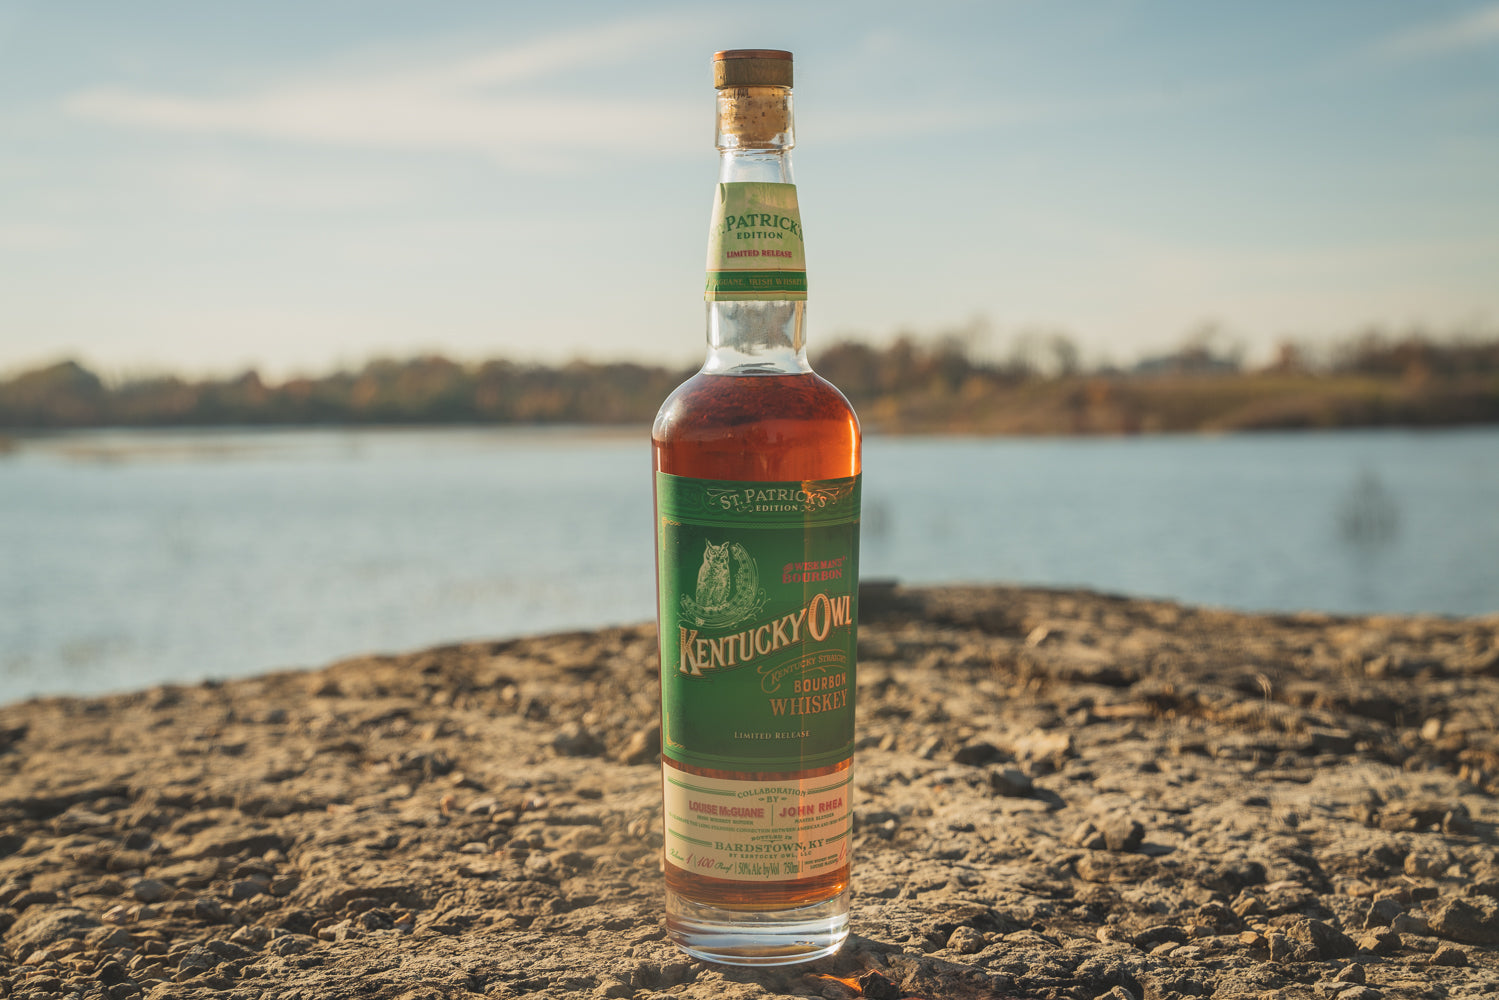 Kentucky Owl Bourbon St Patrick's Day (Limited Edition)